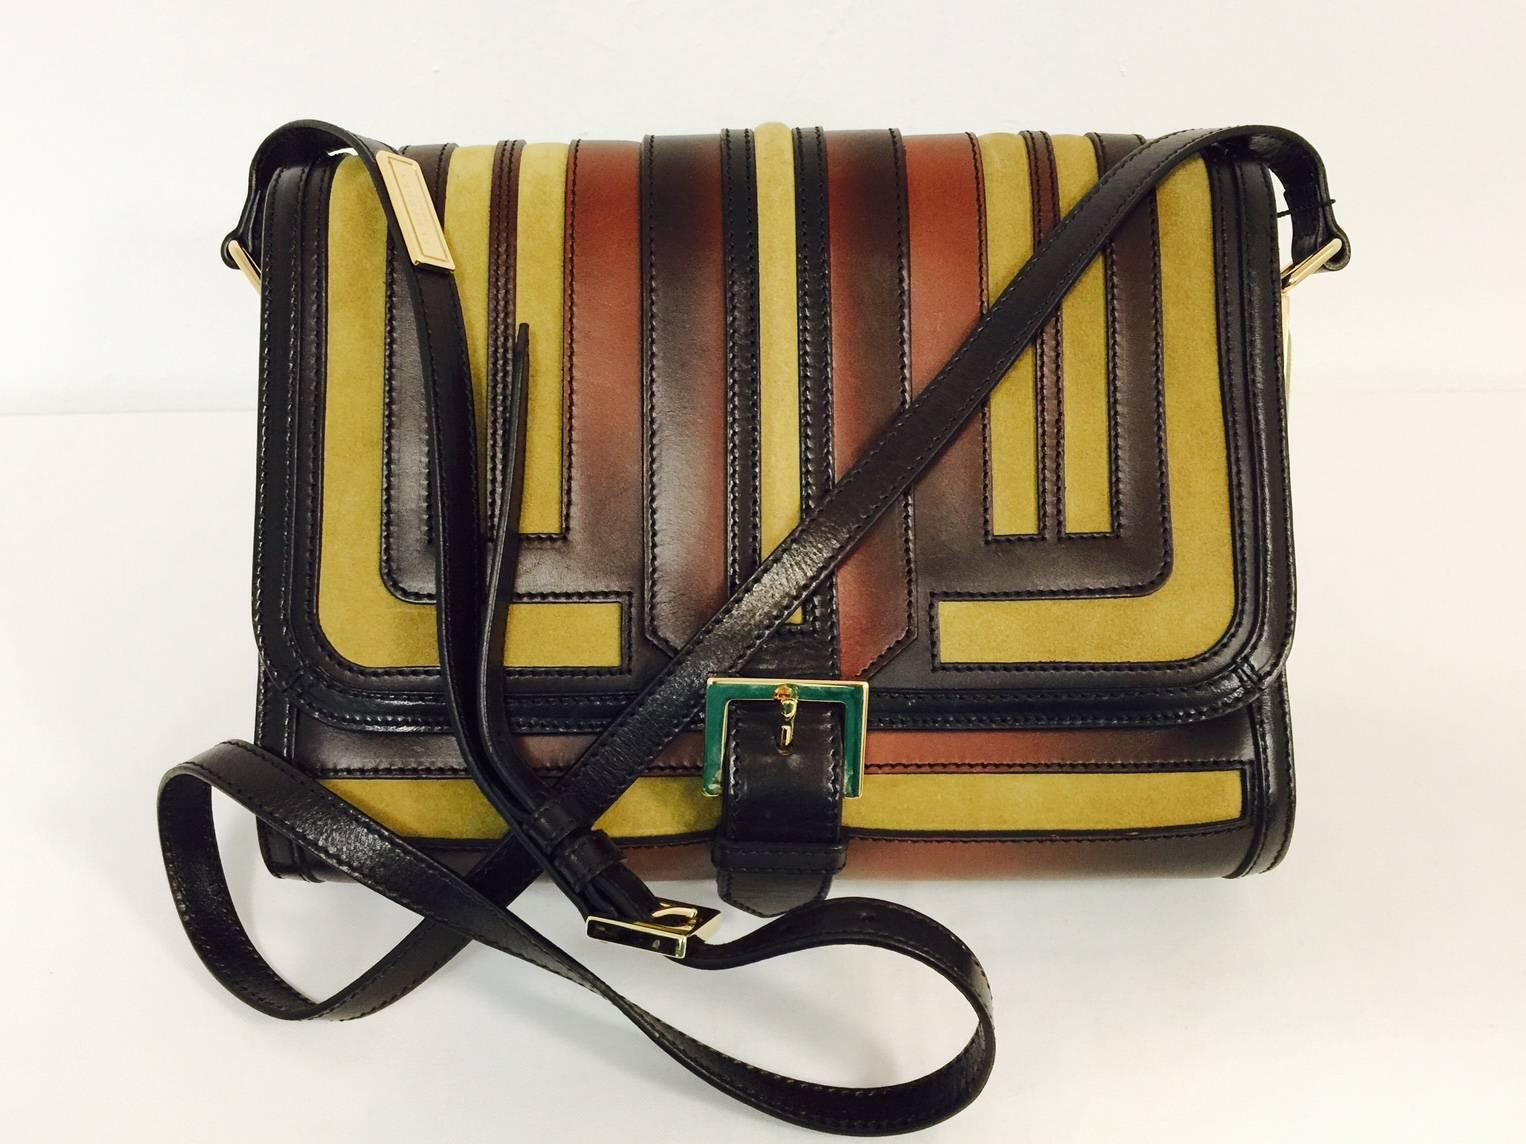 Black  Burberry Prorsum Burnished Cognac Leather Shoulder Bag With Suede Accents